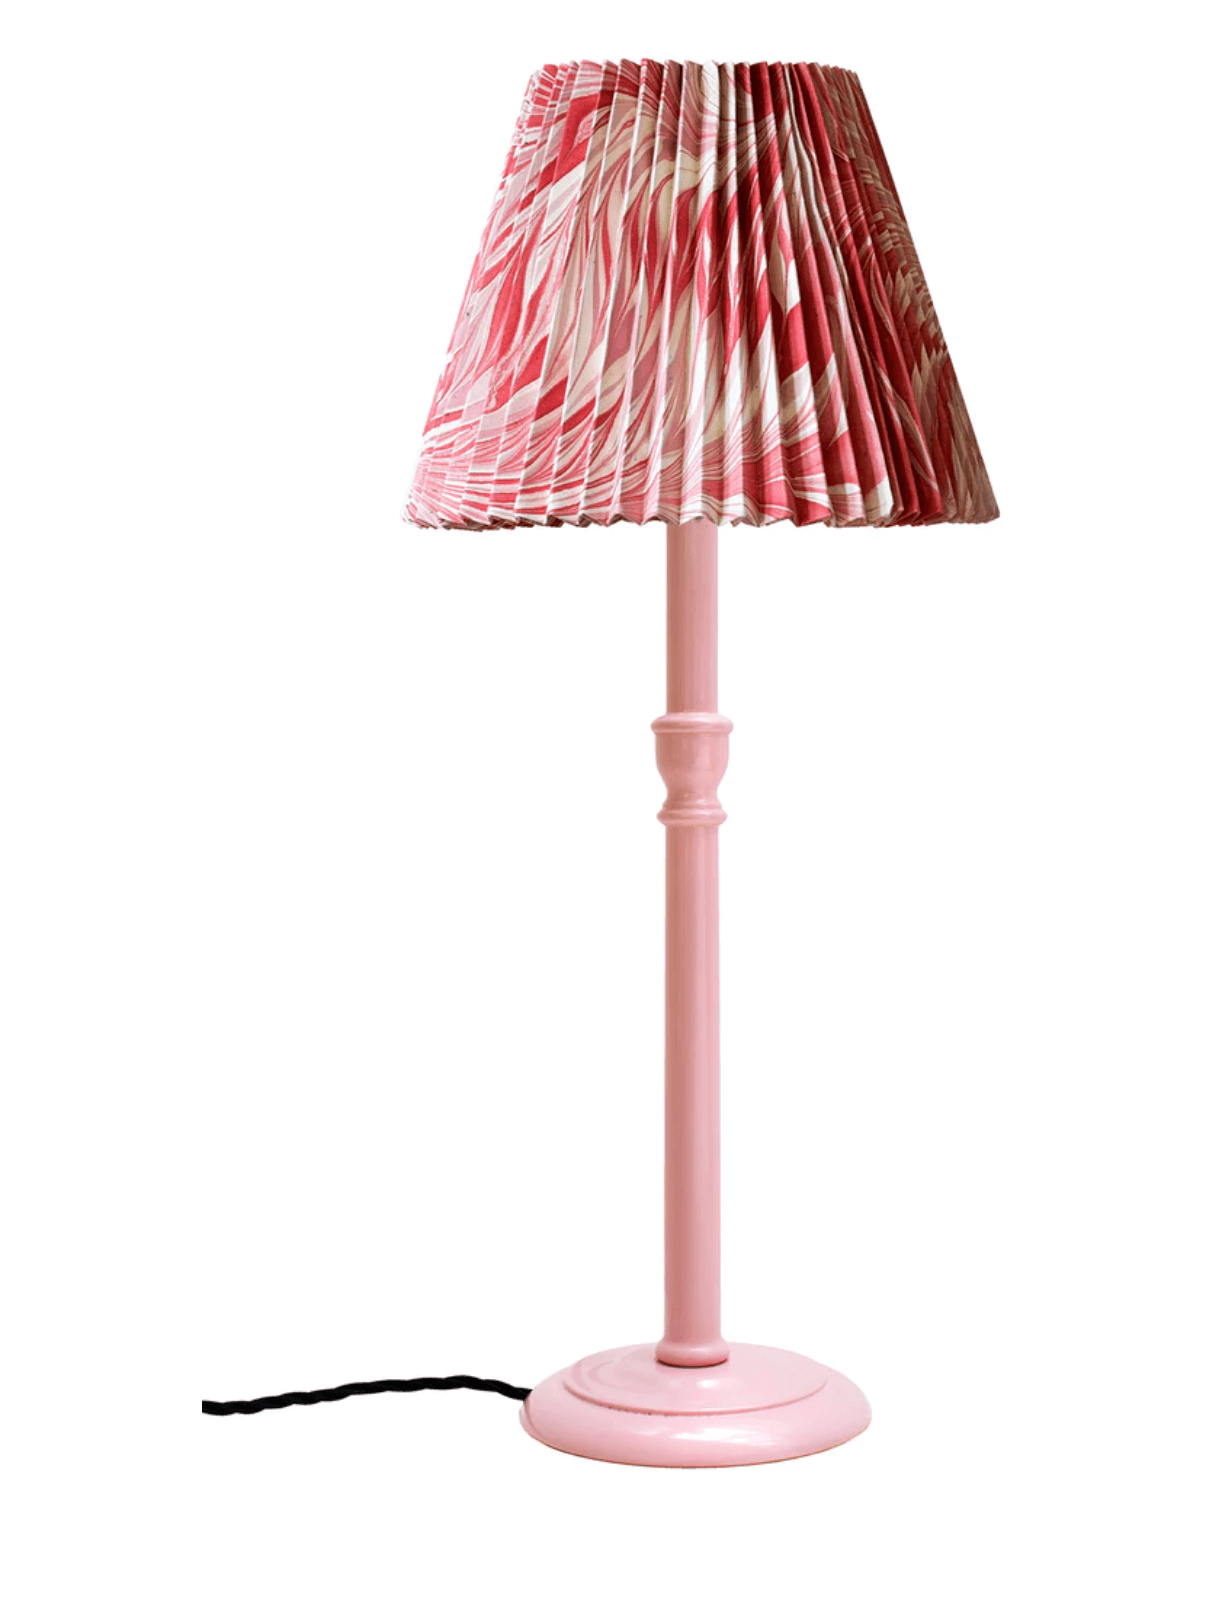 Pleated pink and red lampshade on Pink lamp